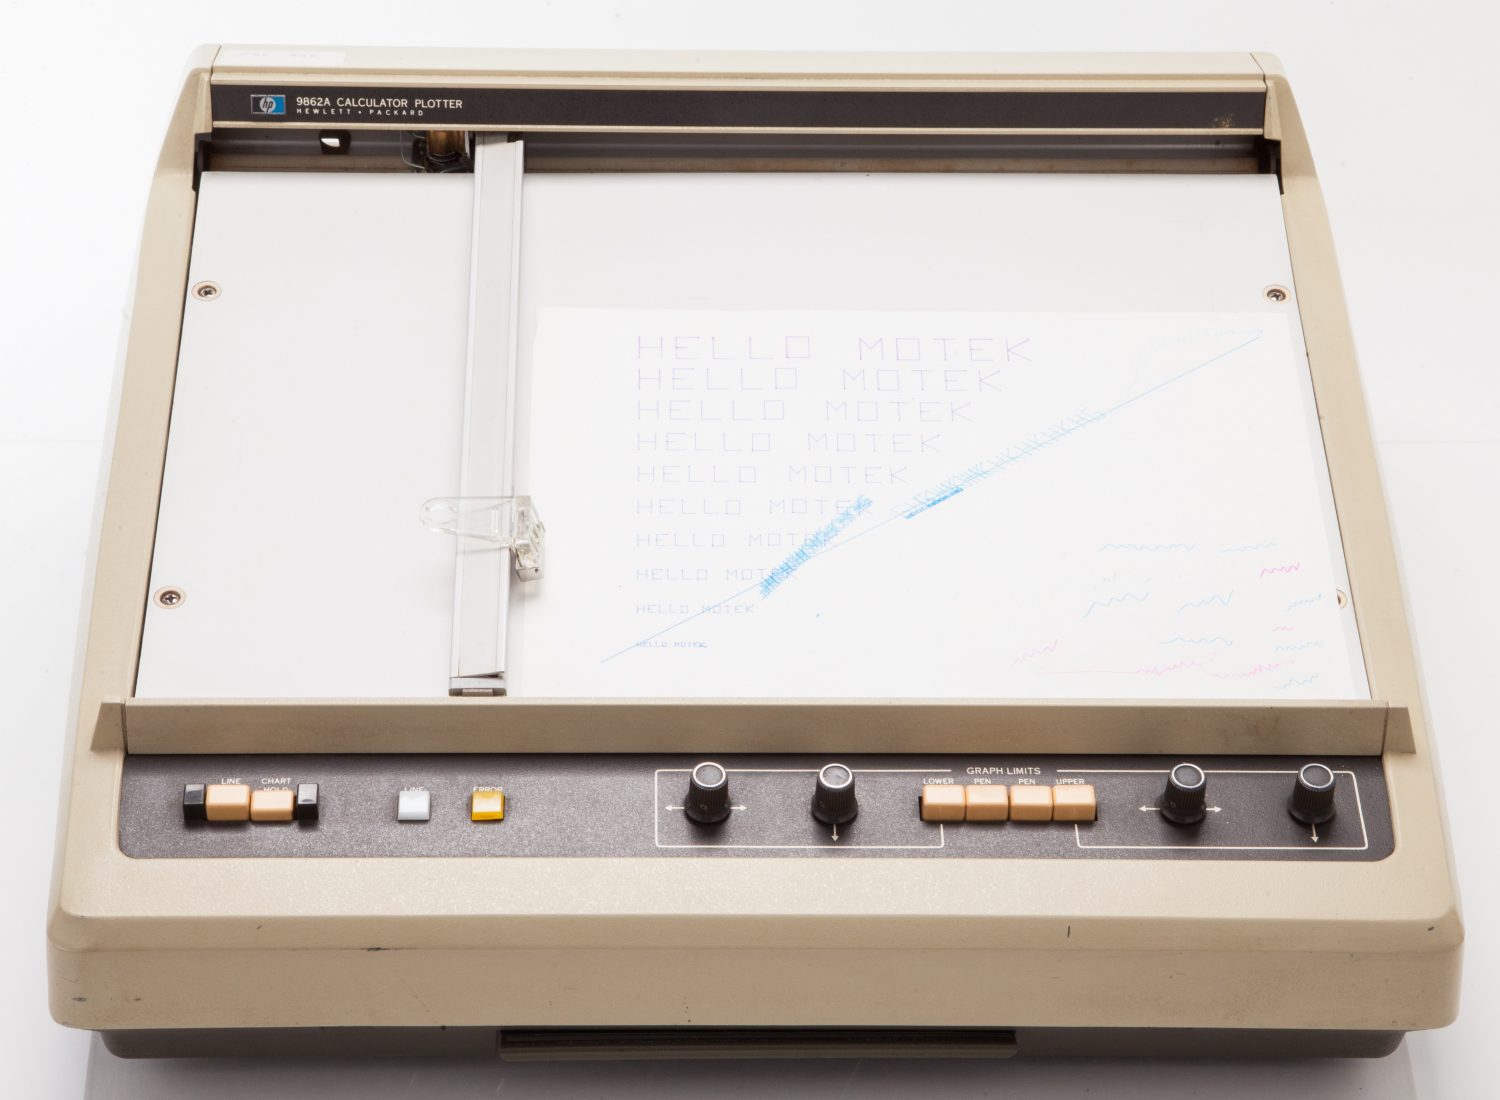 Top view of the HP 9862A plotter, one of the company's earliest personal printers.